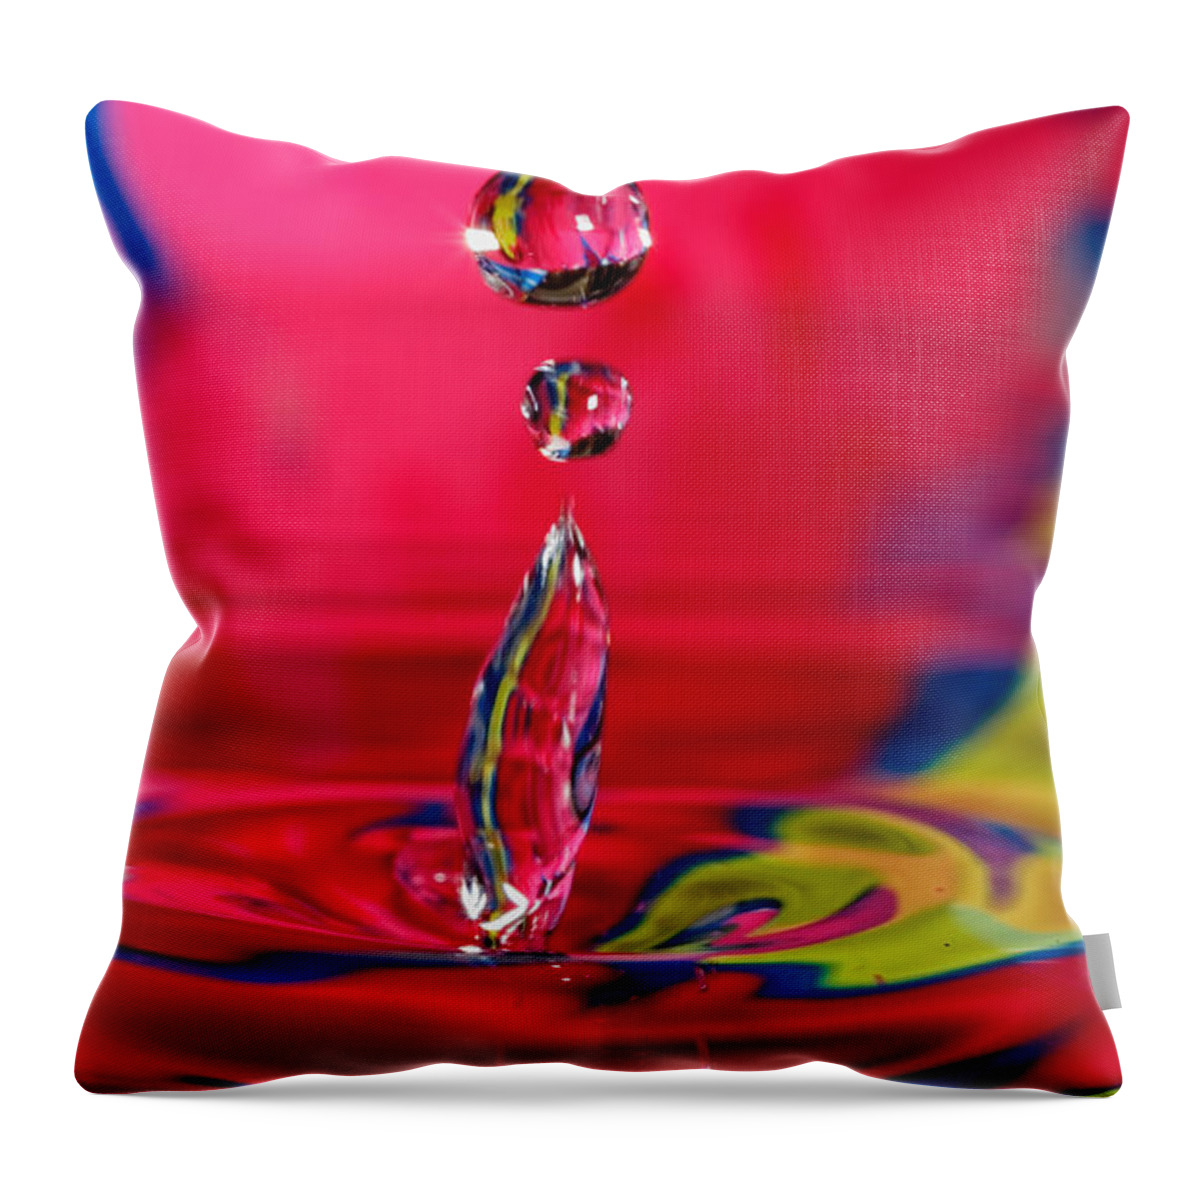  Abstract Throw Pillow featuring the photograph Colorful Water Drop by Peter Lakomy